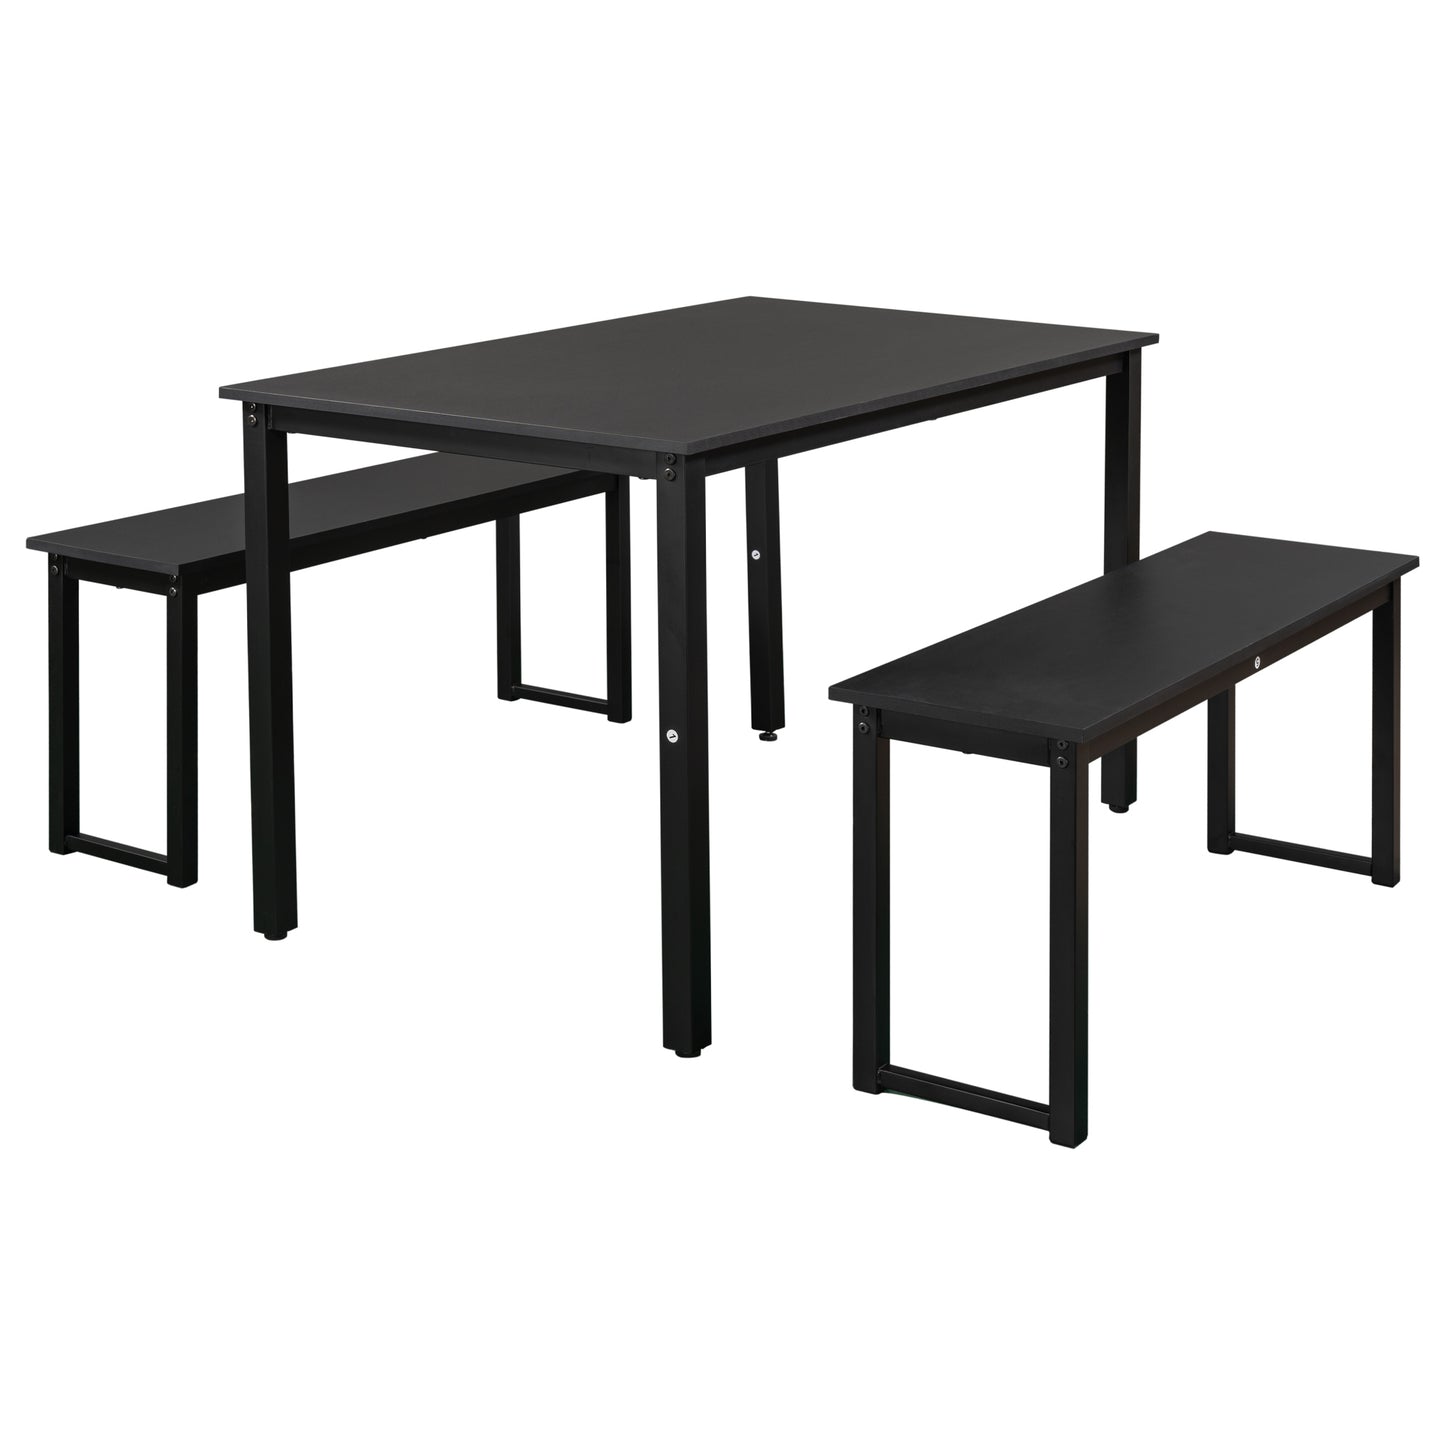 3 Pieces Modern Kitchen Table Set, High Counter Dining Table w/ 2 Benches, Stylish Dining Table Furniture Set, 4-Person Space-Saving Dinette, Modern Pub Table Set, Elegant Bistro Table Set, C14